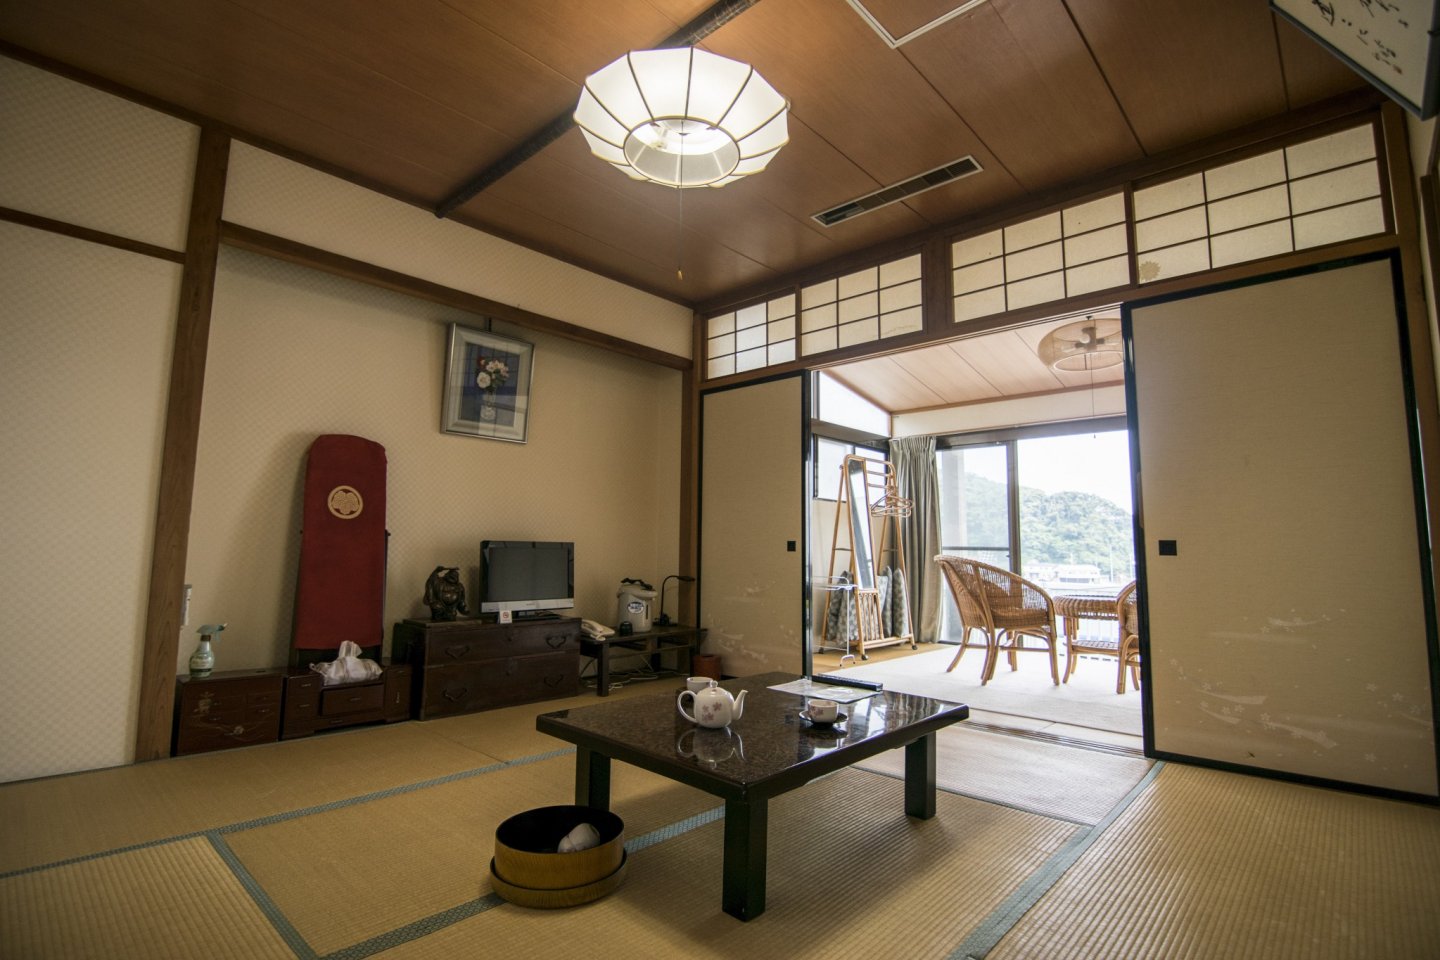 The rooms here at Fukuma-kan are Japanese styled, with a living area and an lounge area.